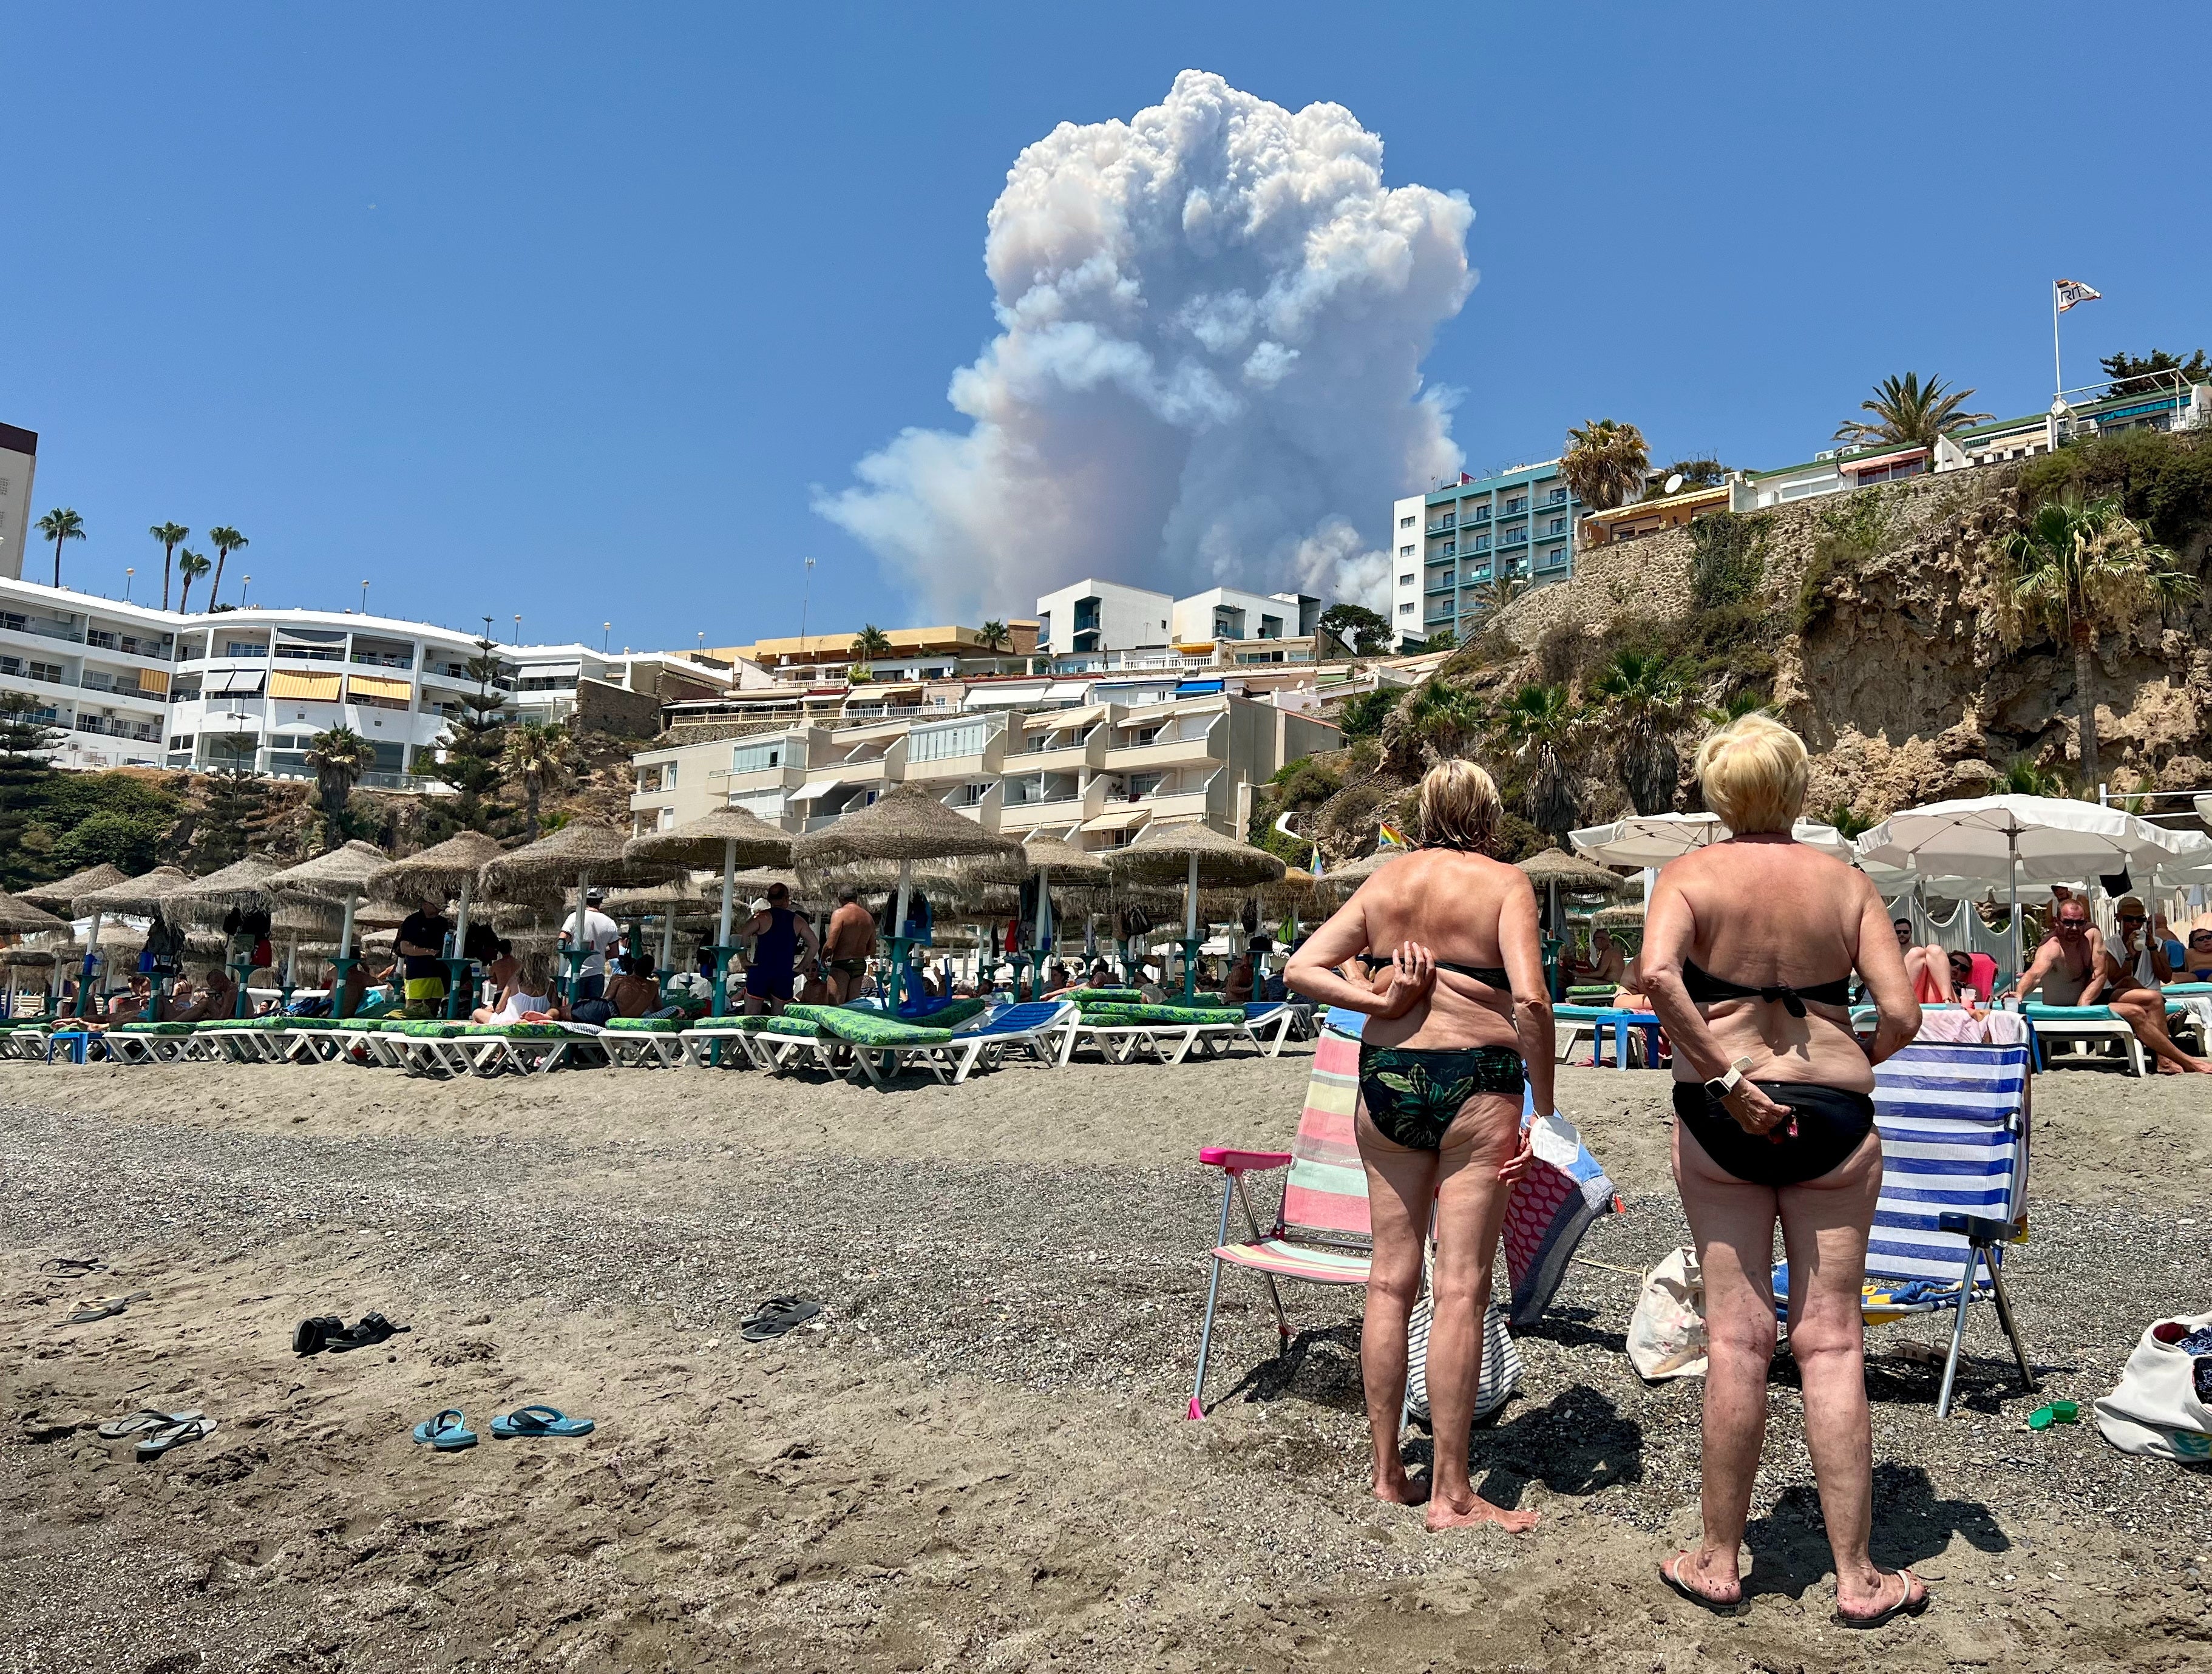 Bathers in Torremolinos watch plumes of smoke caused by a wildfire